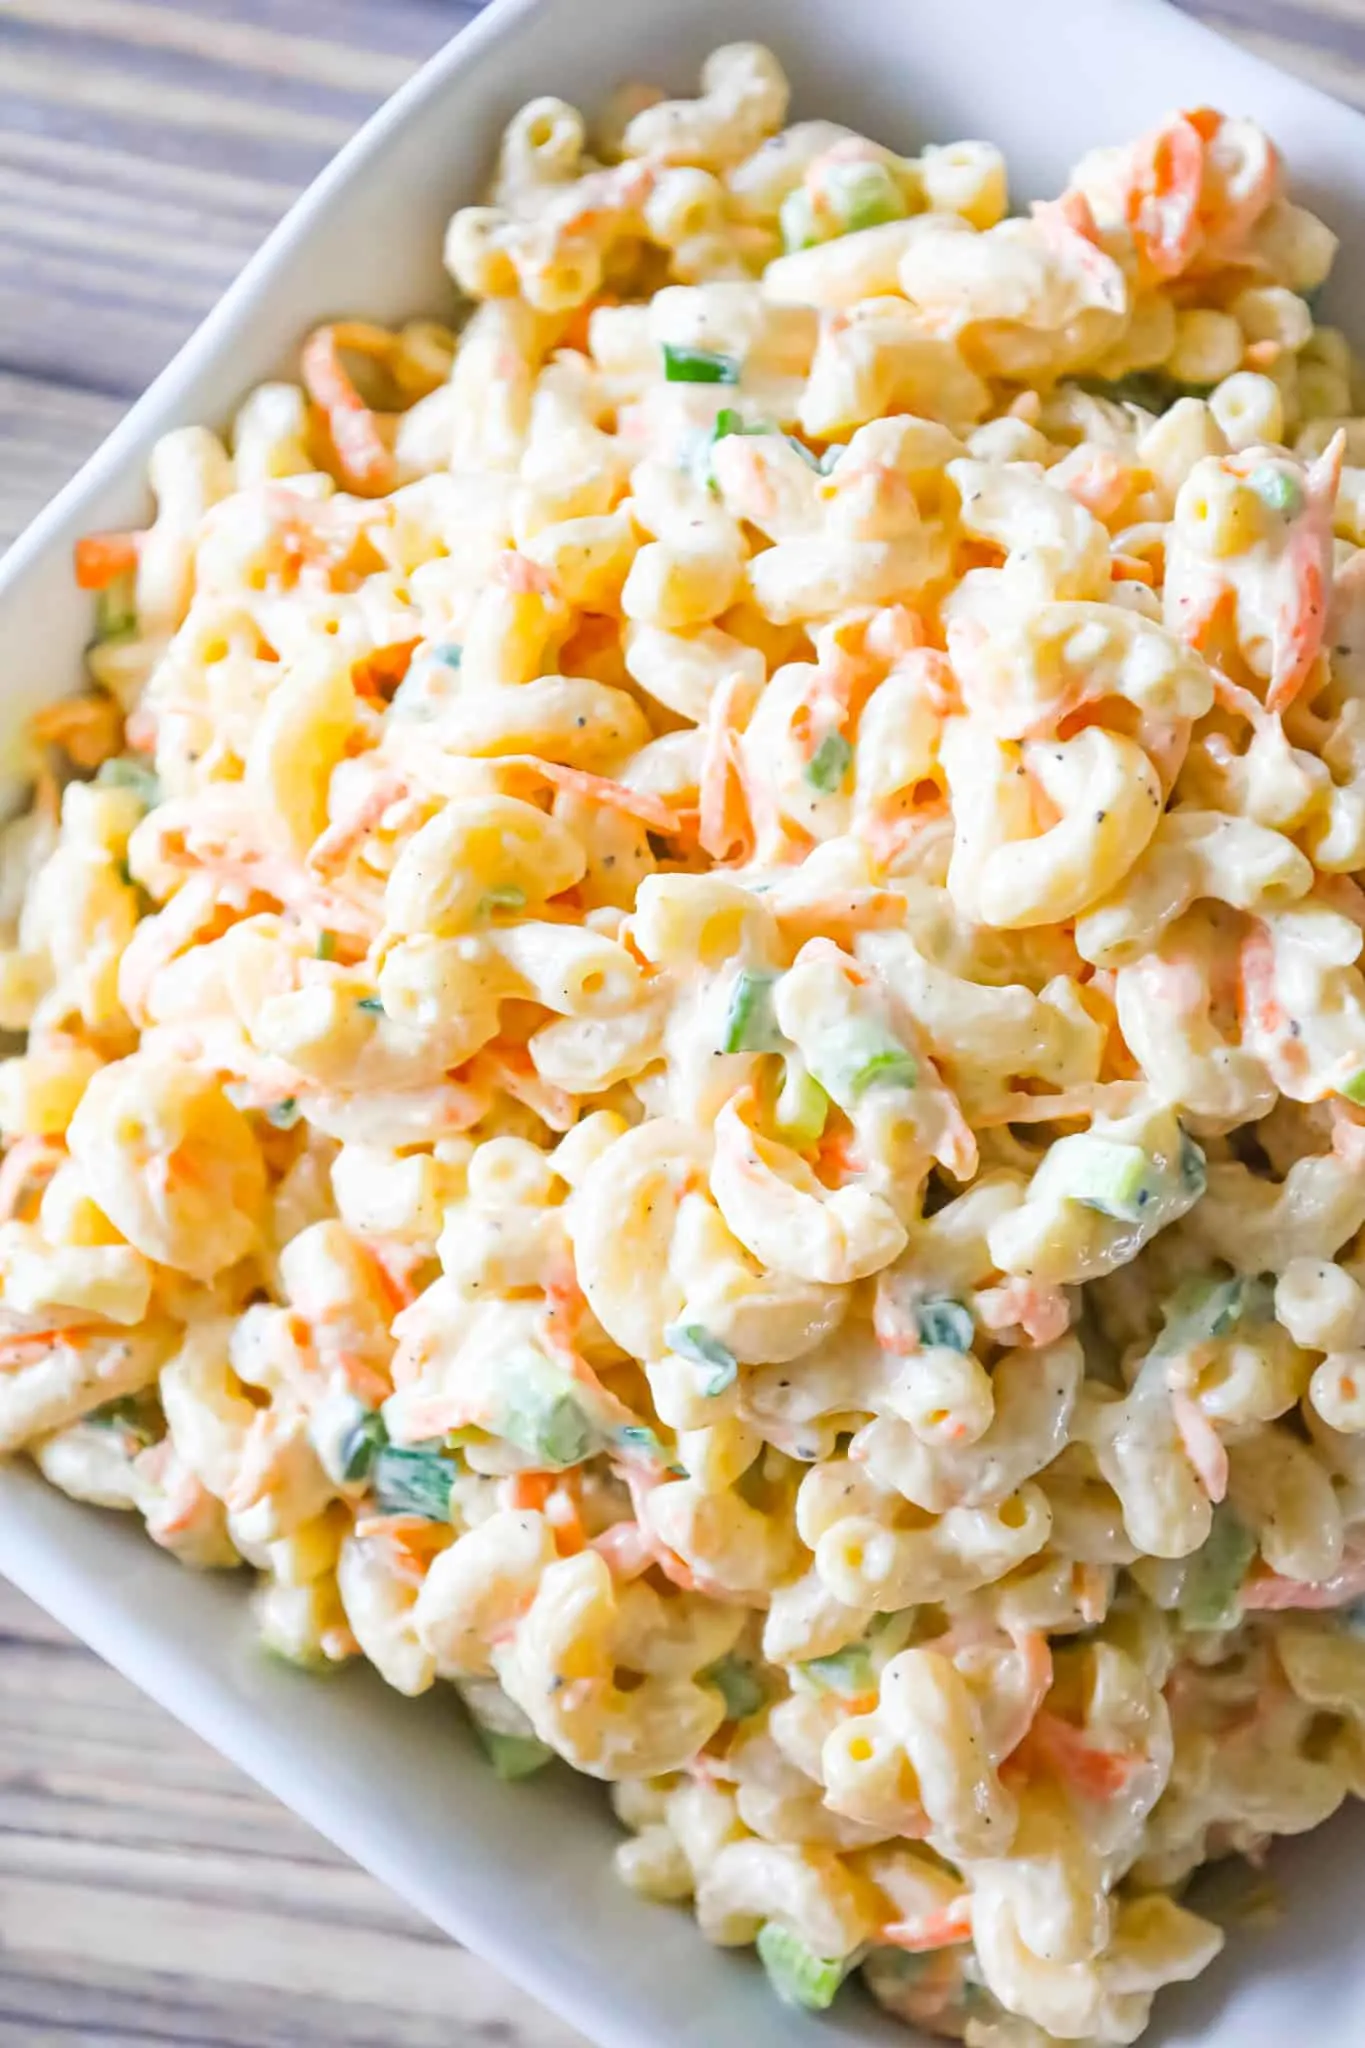 Hawaiian Macaroni Salad is a creamy pasta salad recipe loaded with grated carrots, yellow onion and chopped green onion.